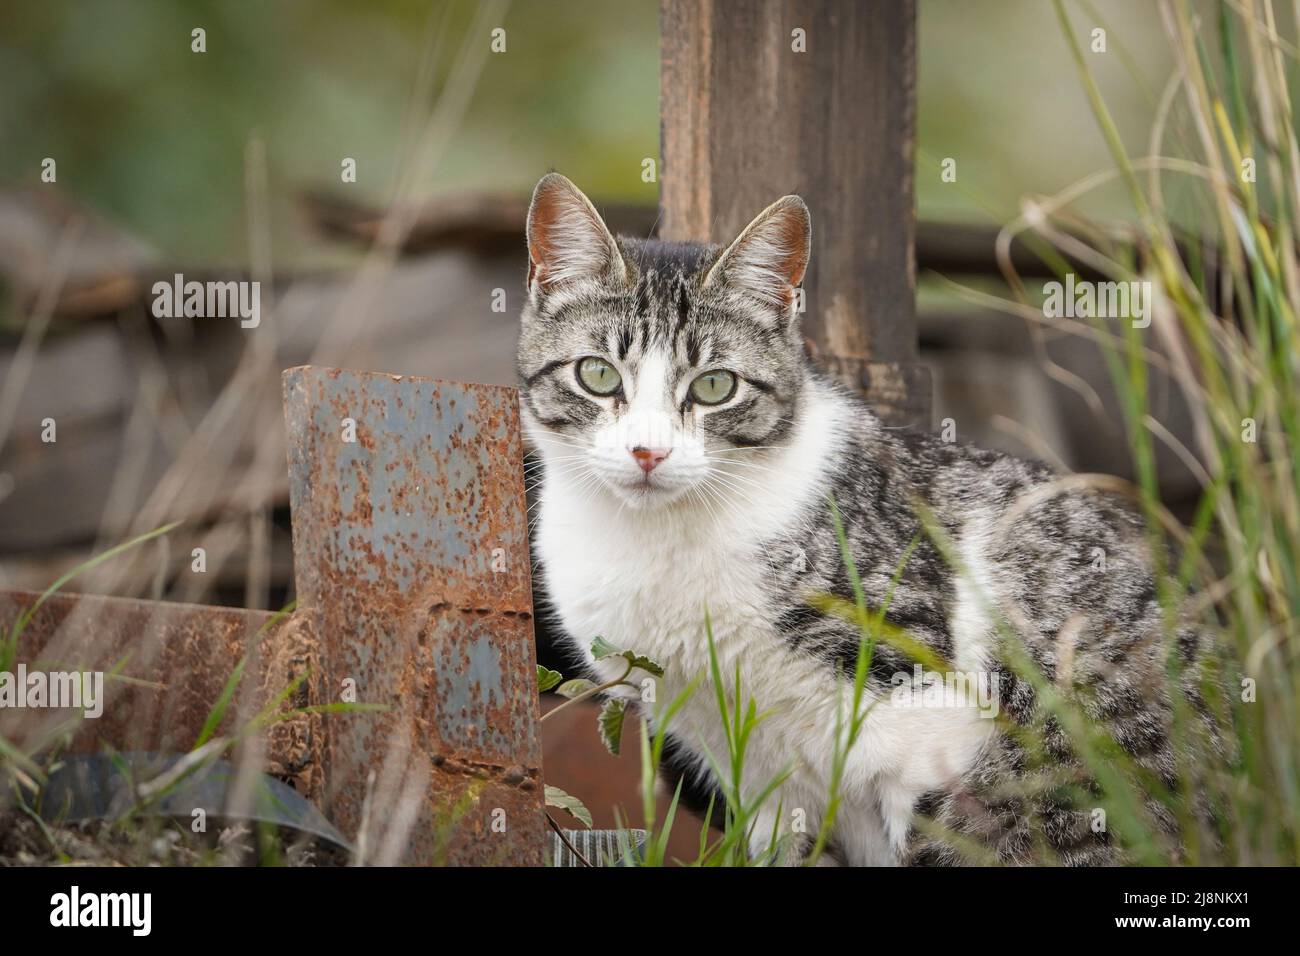 Allert young cat watching camera. Stock Photo